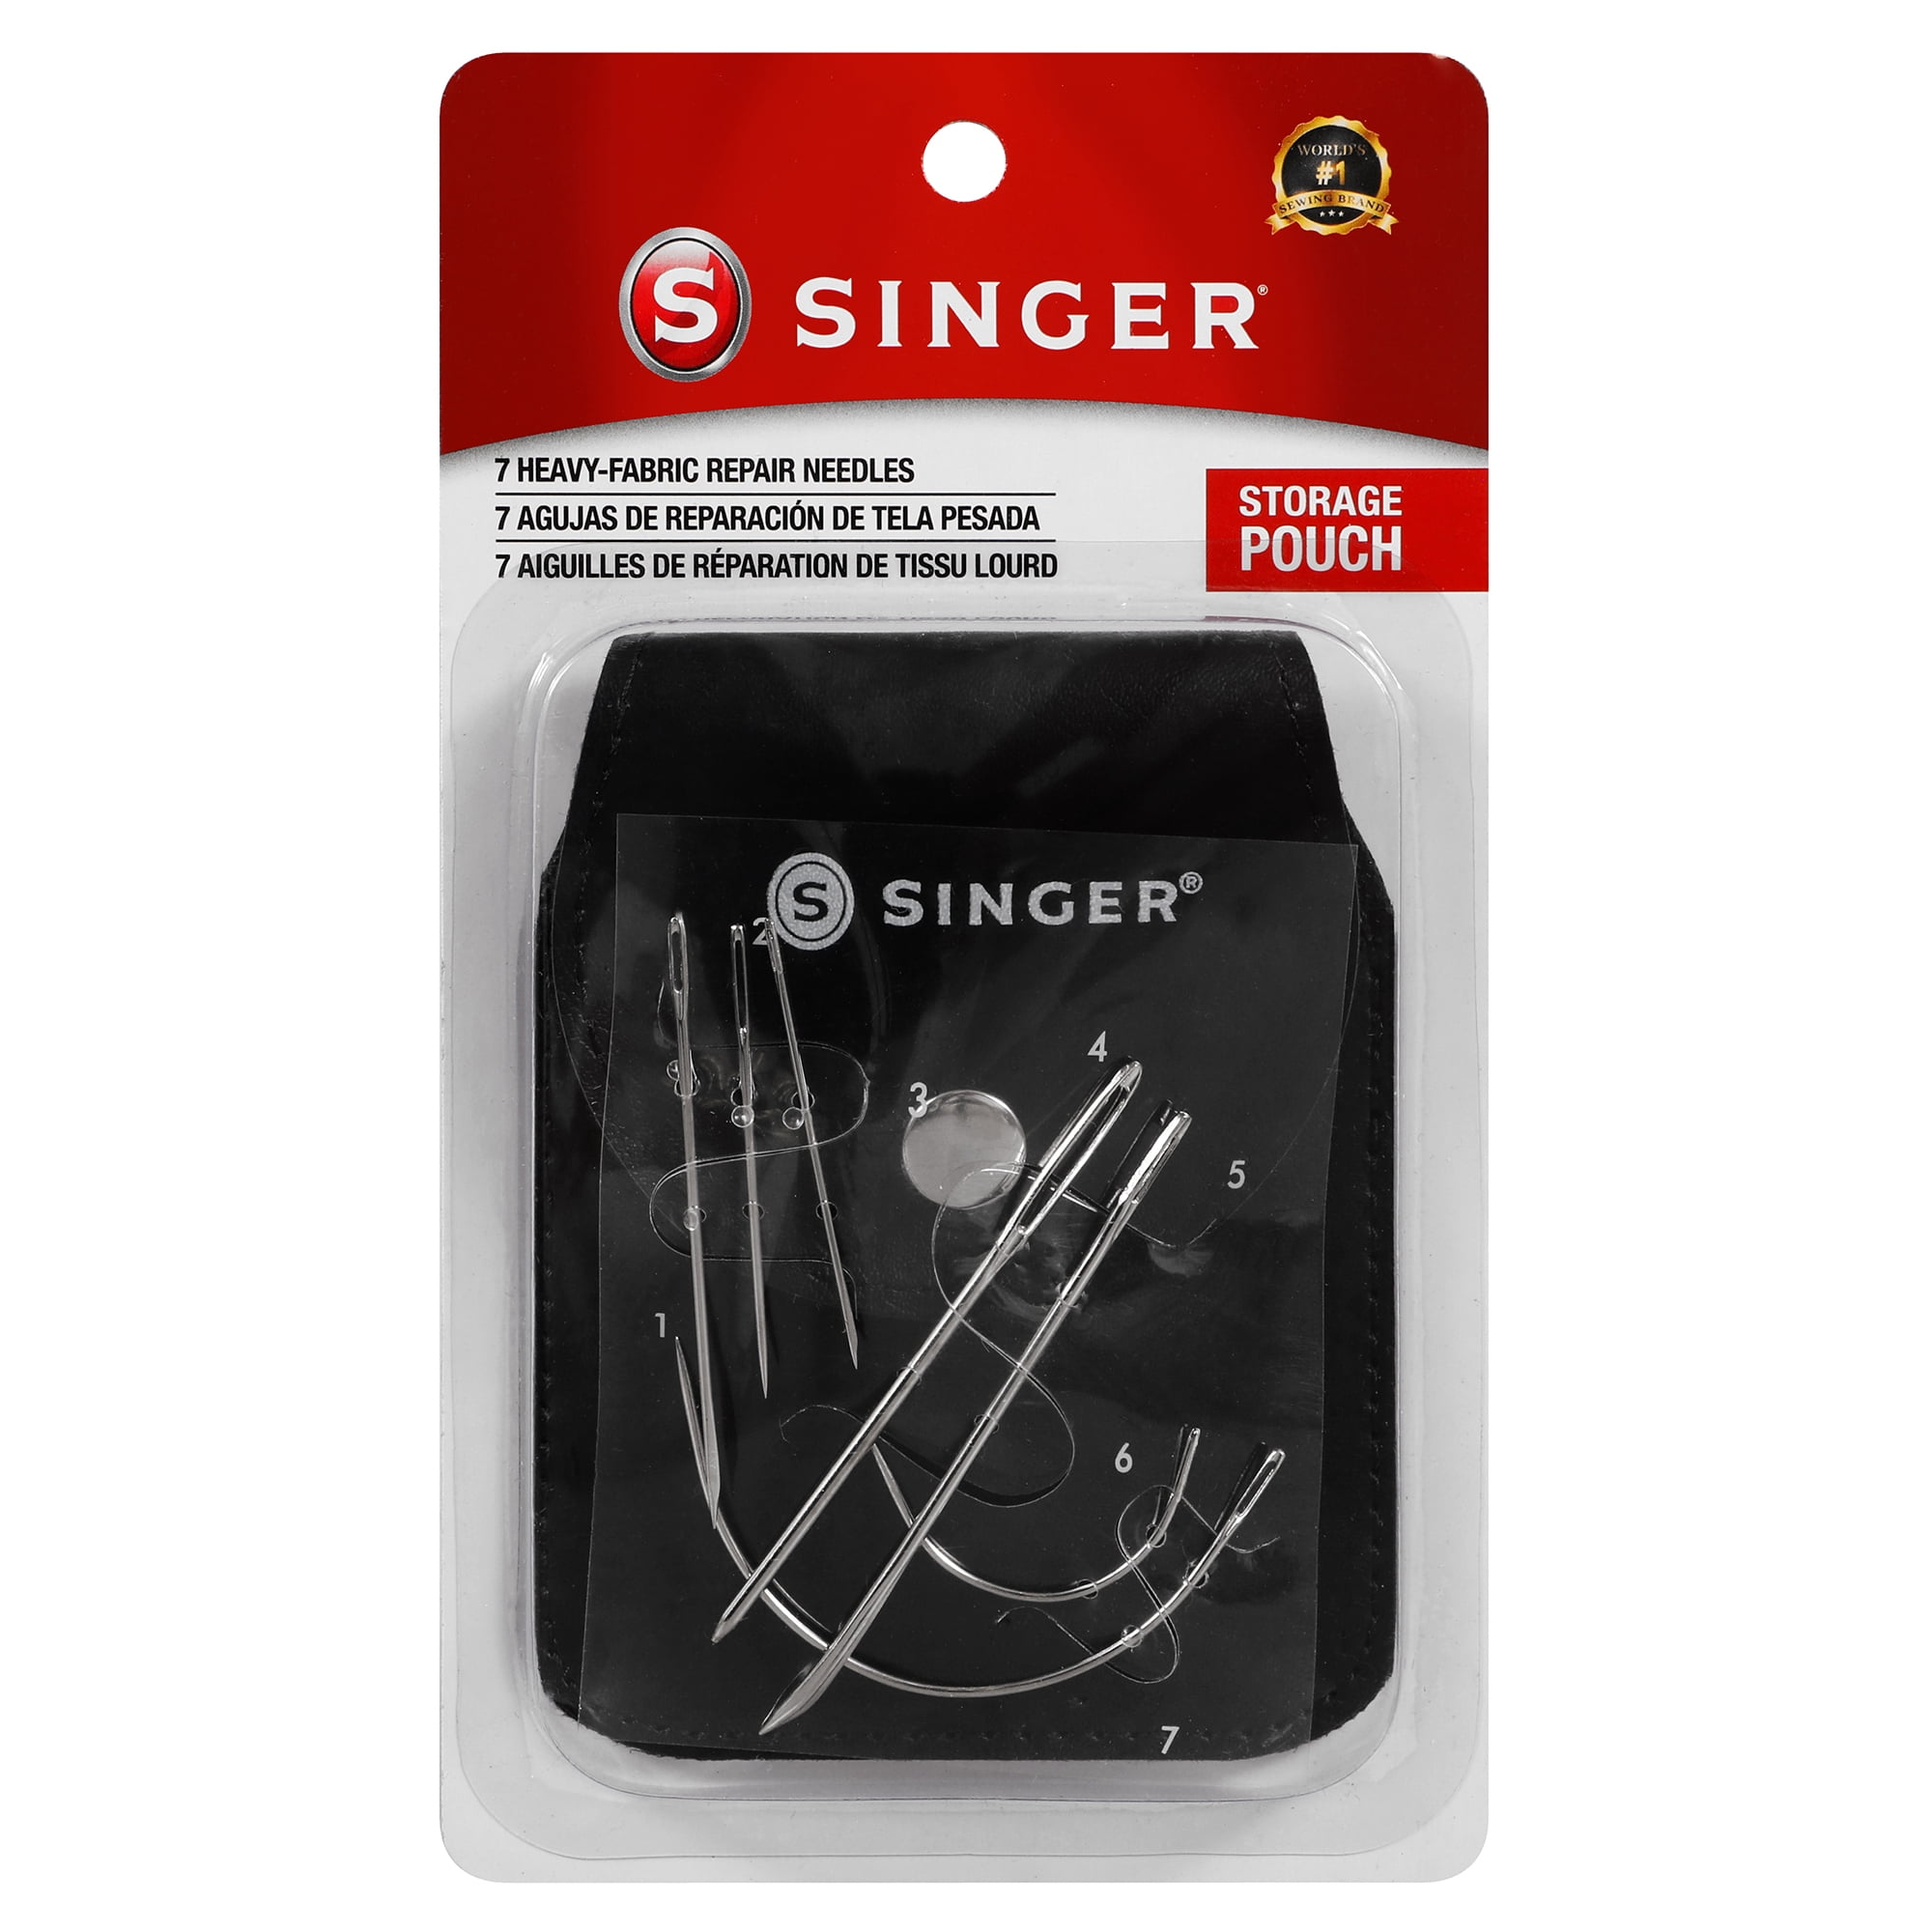 SINGER Heavy Fabric Repair Needles with Storage Pouch, 7 Count